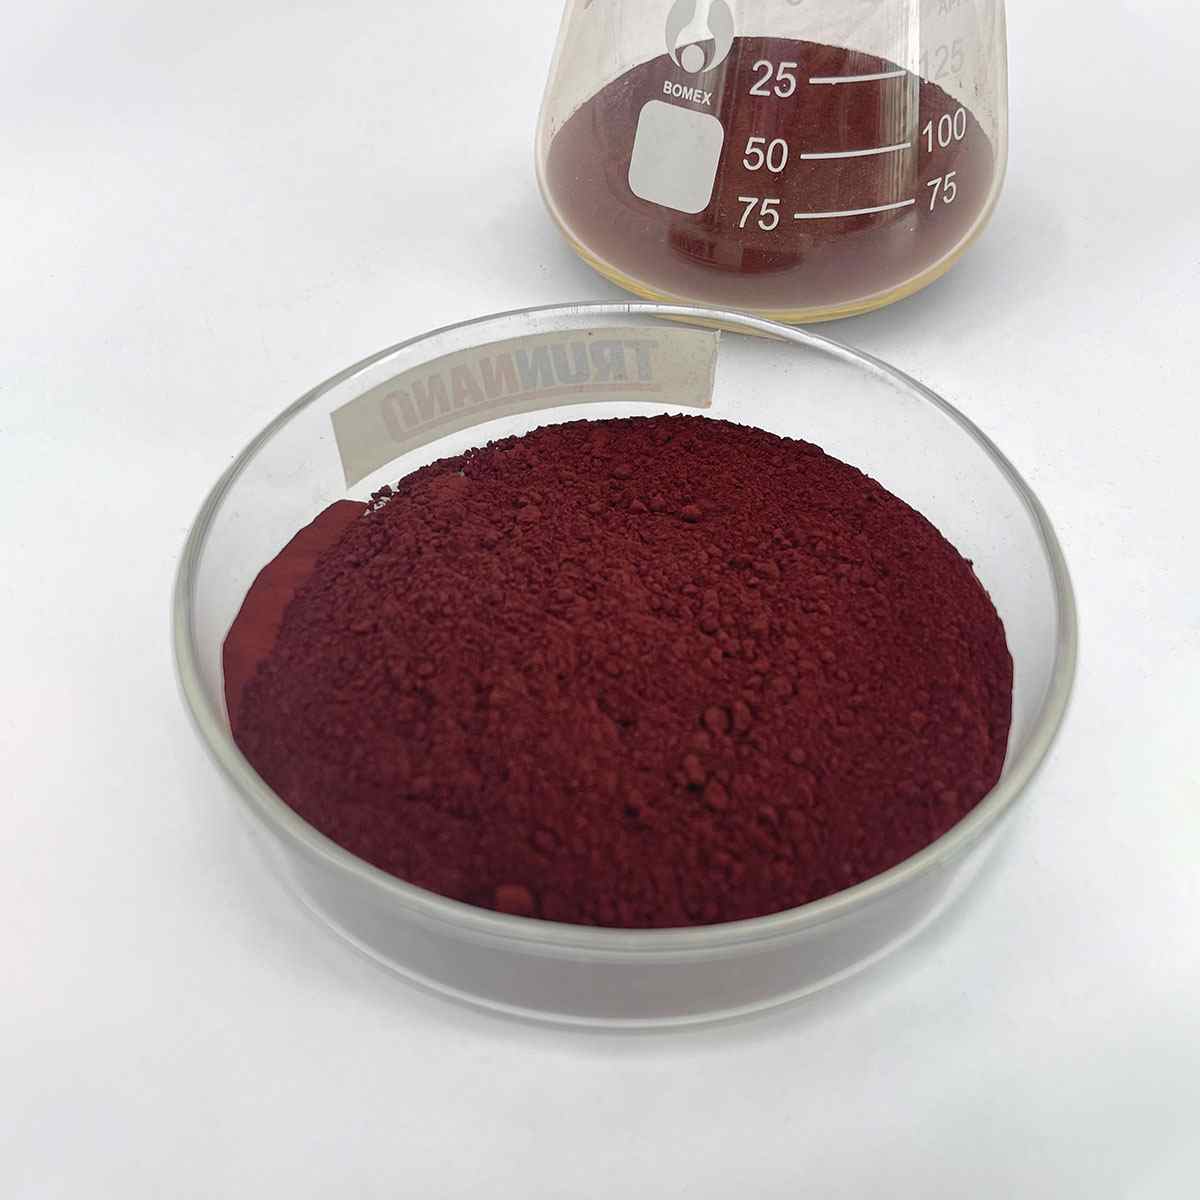 Indium Phosphide InP Powder CAS 22398-80-7: Key Component in Semiconductor Manufacturing 